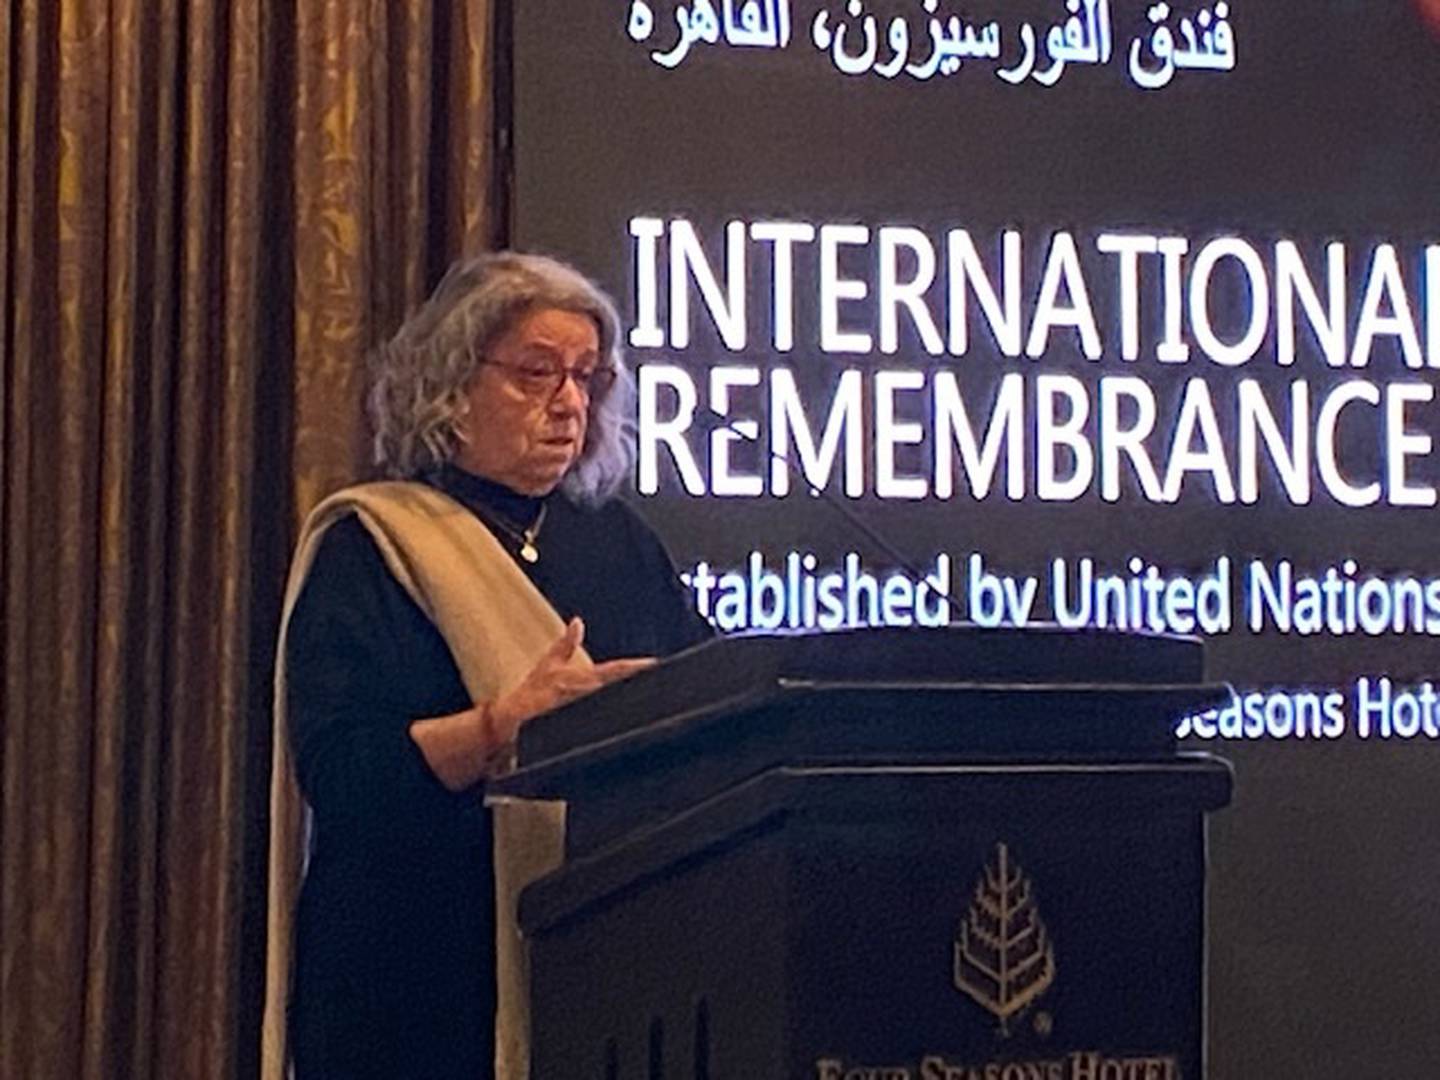 Magda Haroun, the head of the Jewish Community of Egypt speaking at an International Holocaust Remebrance Day celebration in Cairo on January 24, 2022. The event is the first of its kind in living memory.